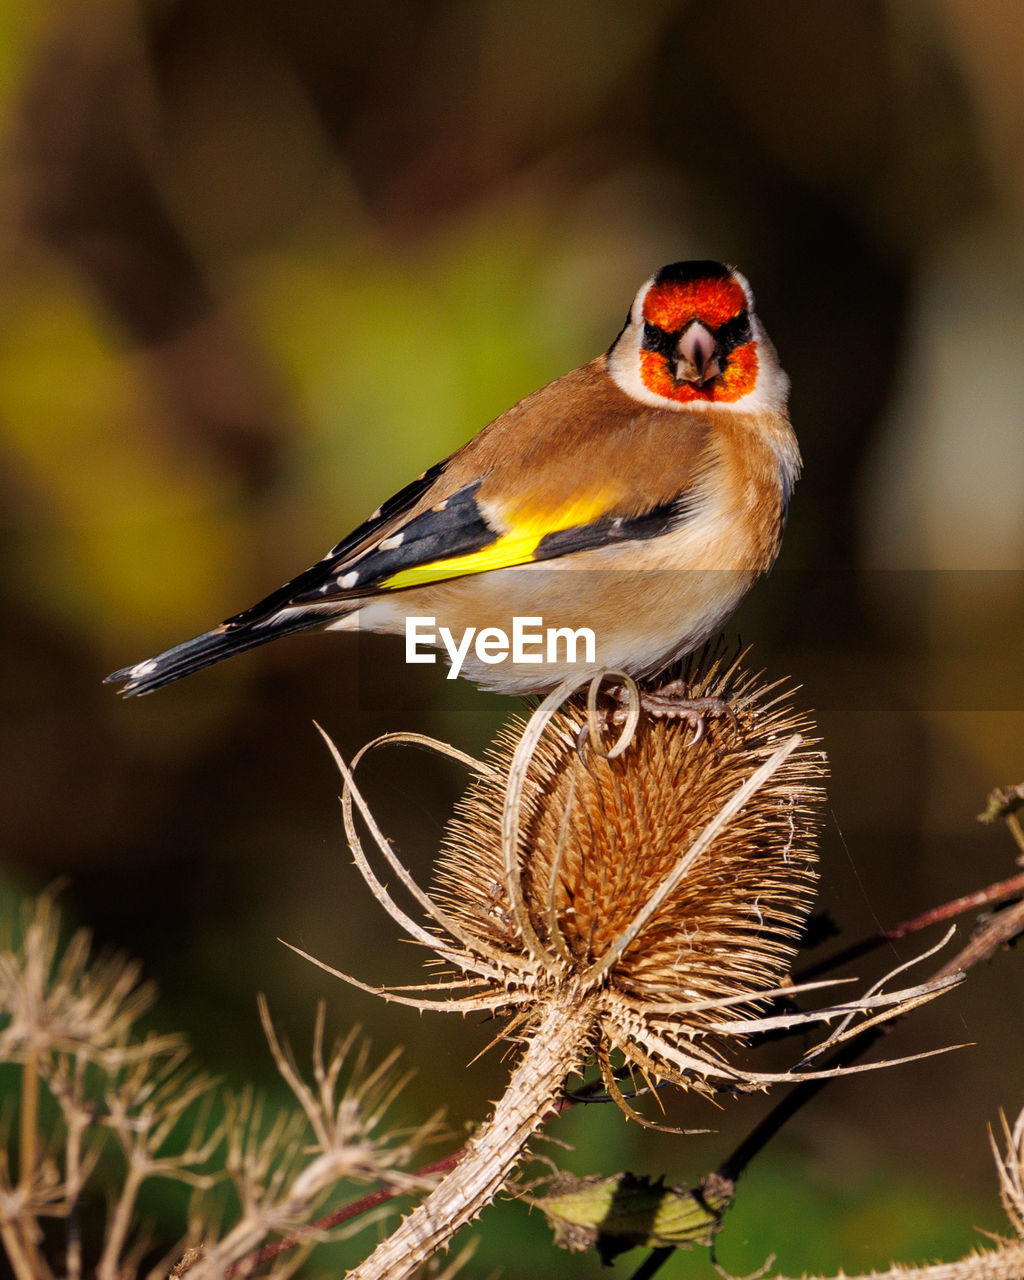 Goldfinch on a teasel